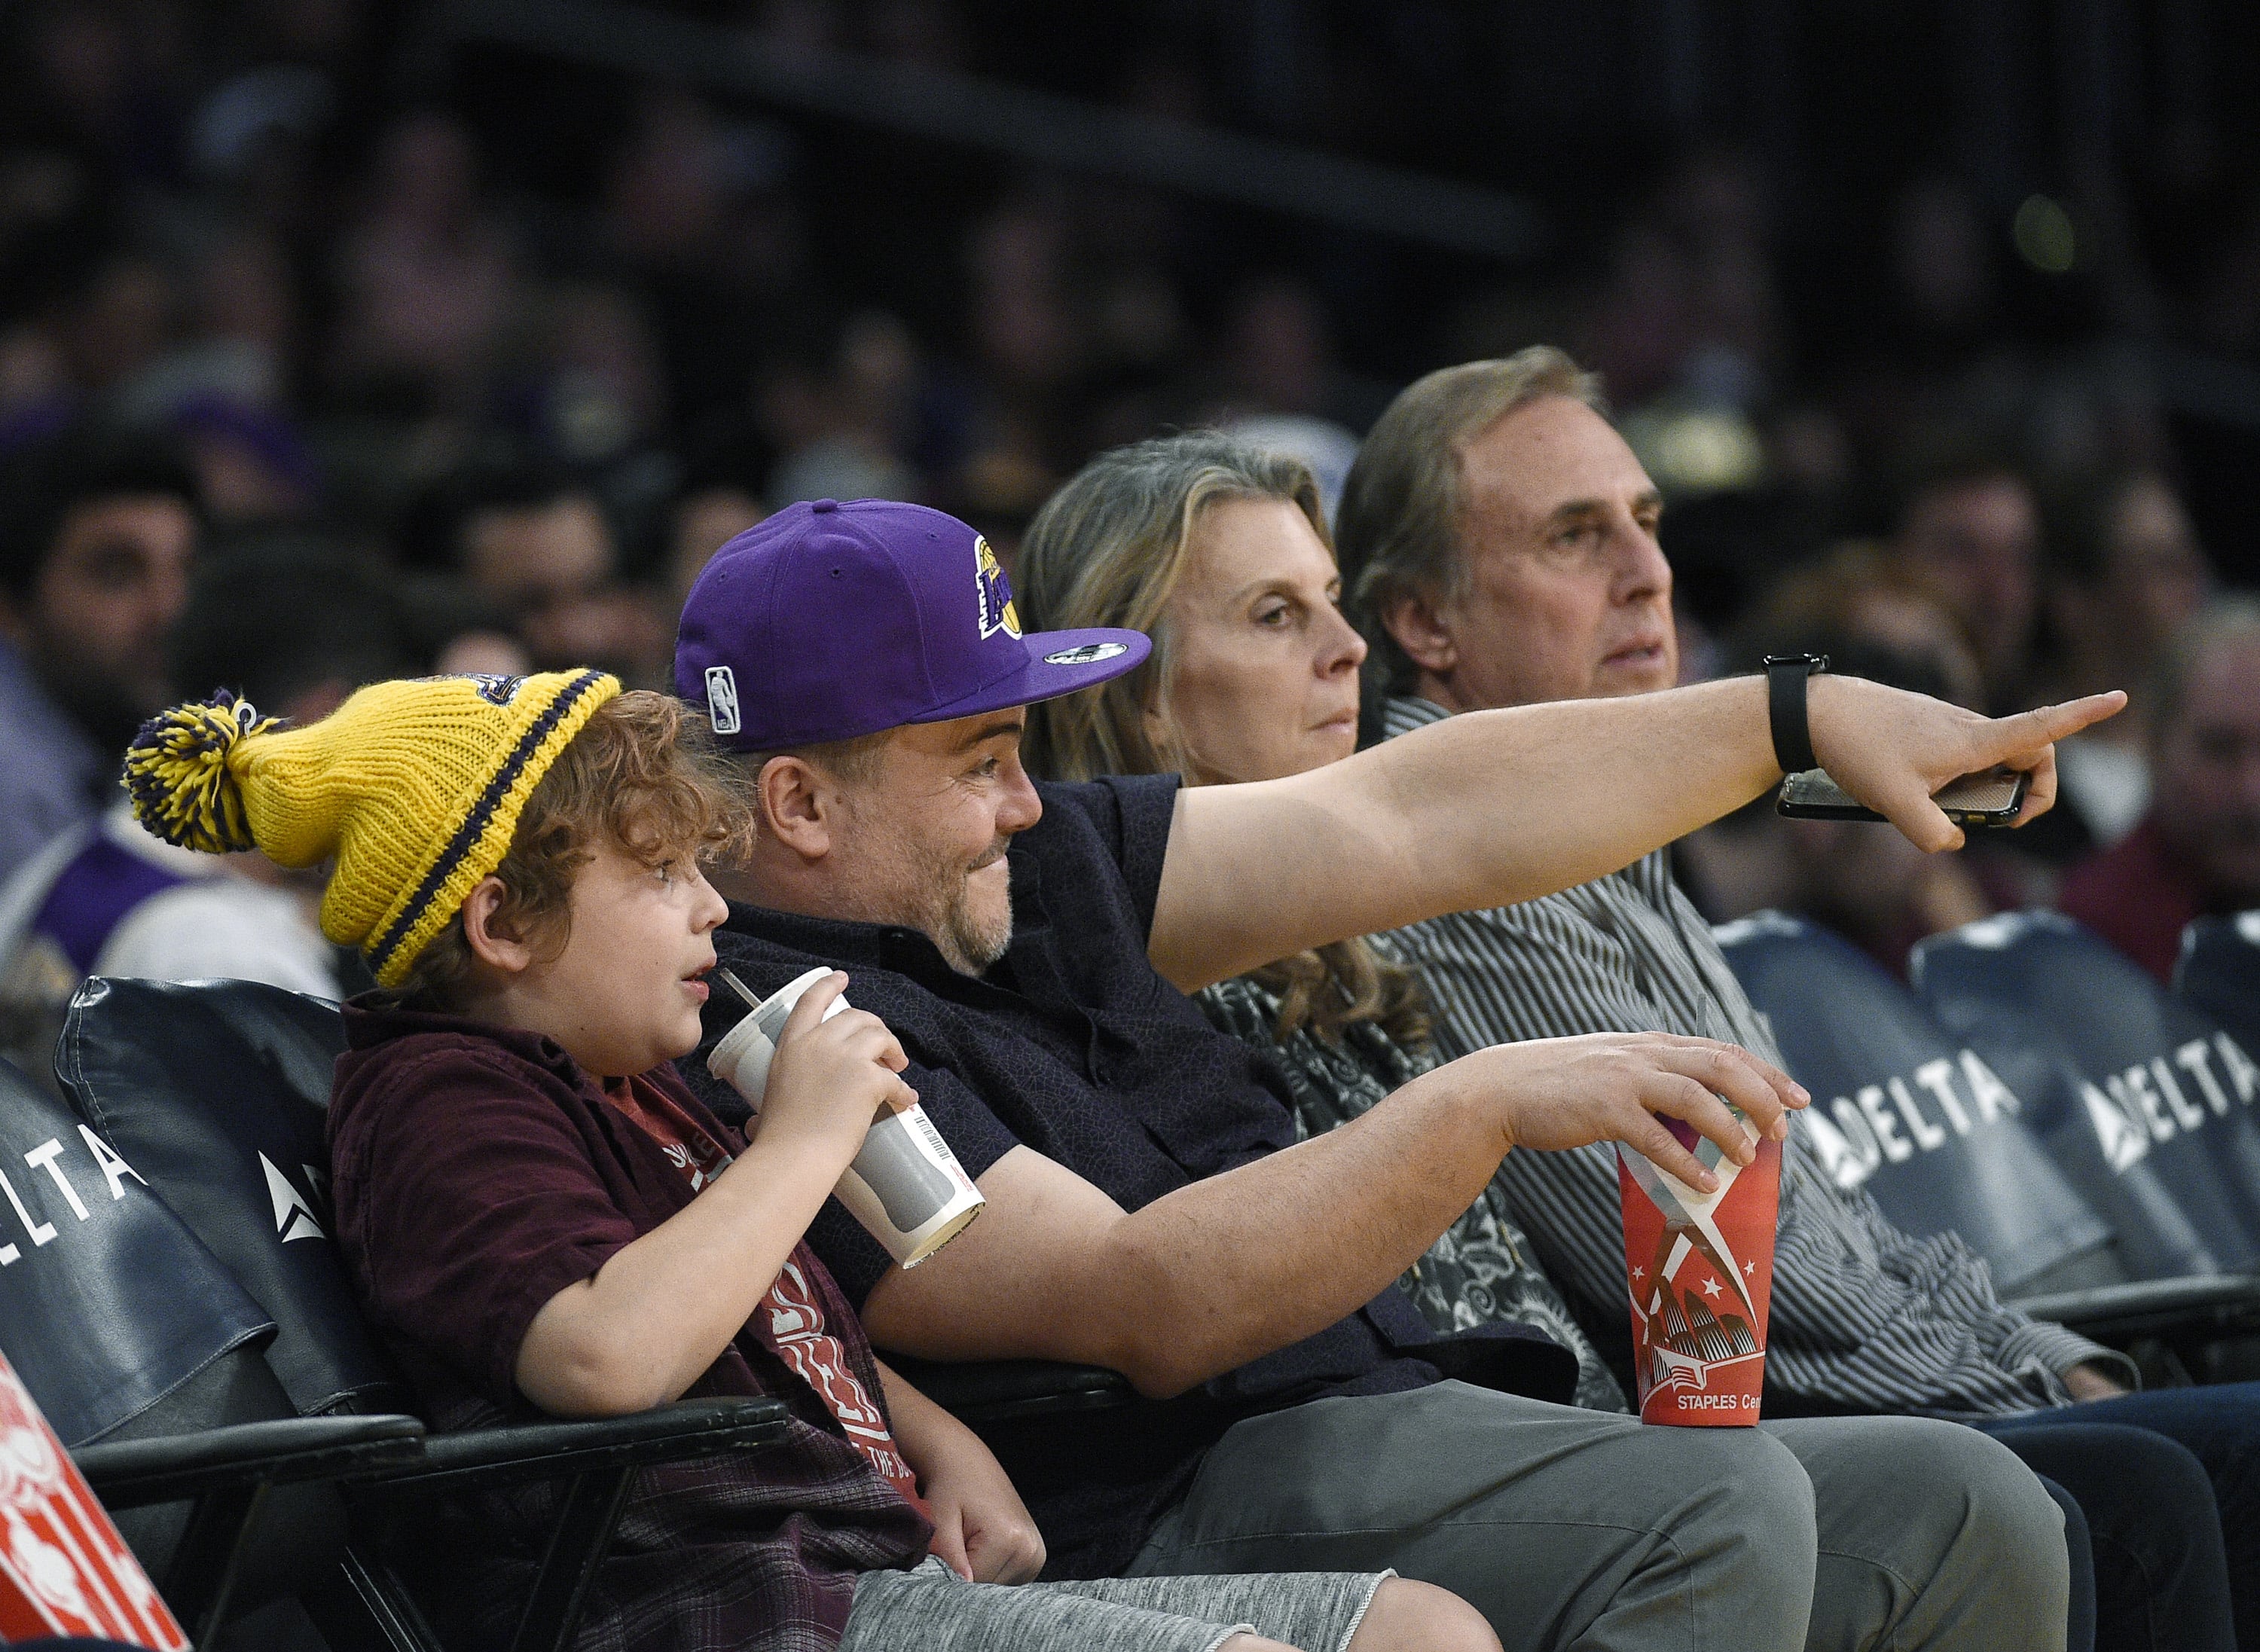 Jack Black and Son at LA Lakers Game March 2017